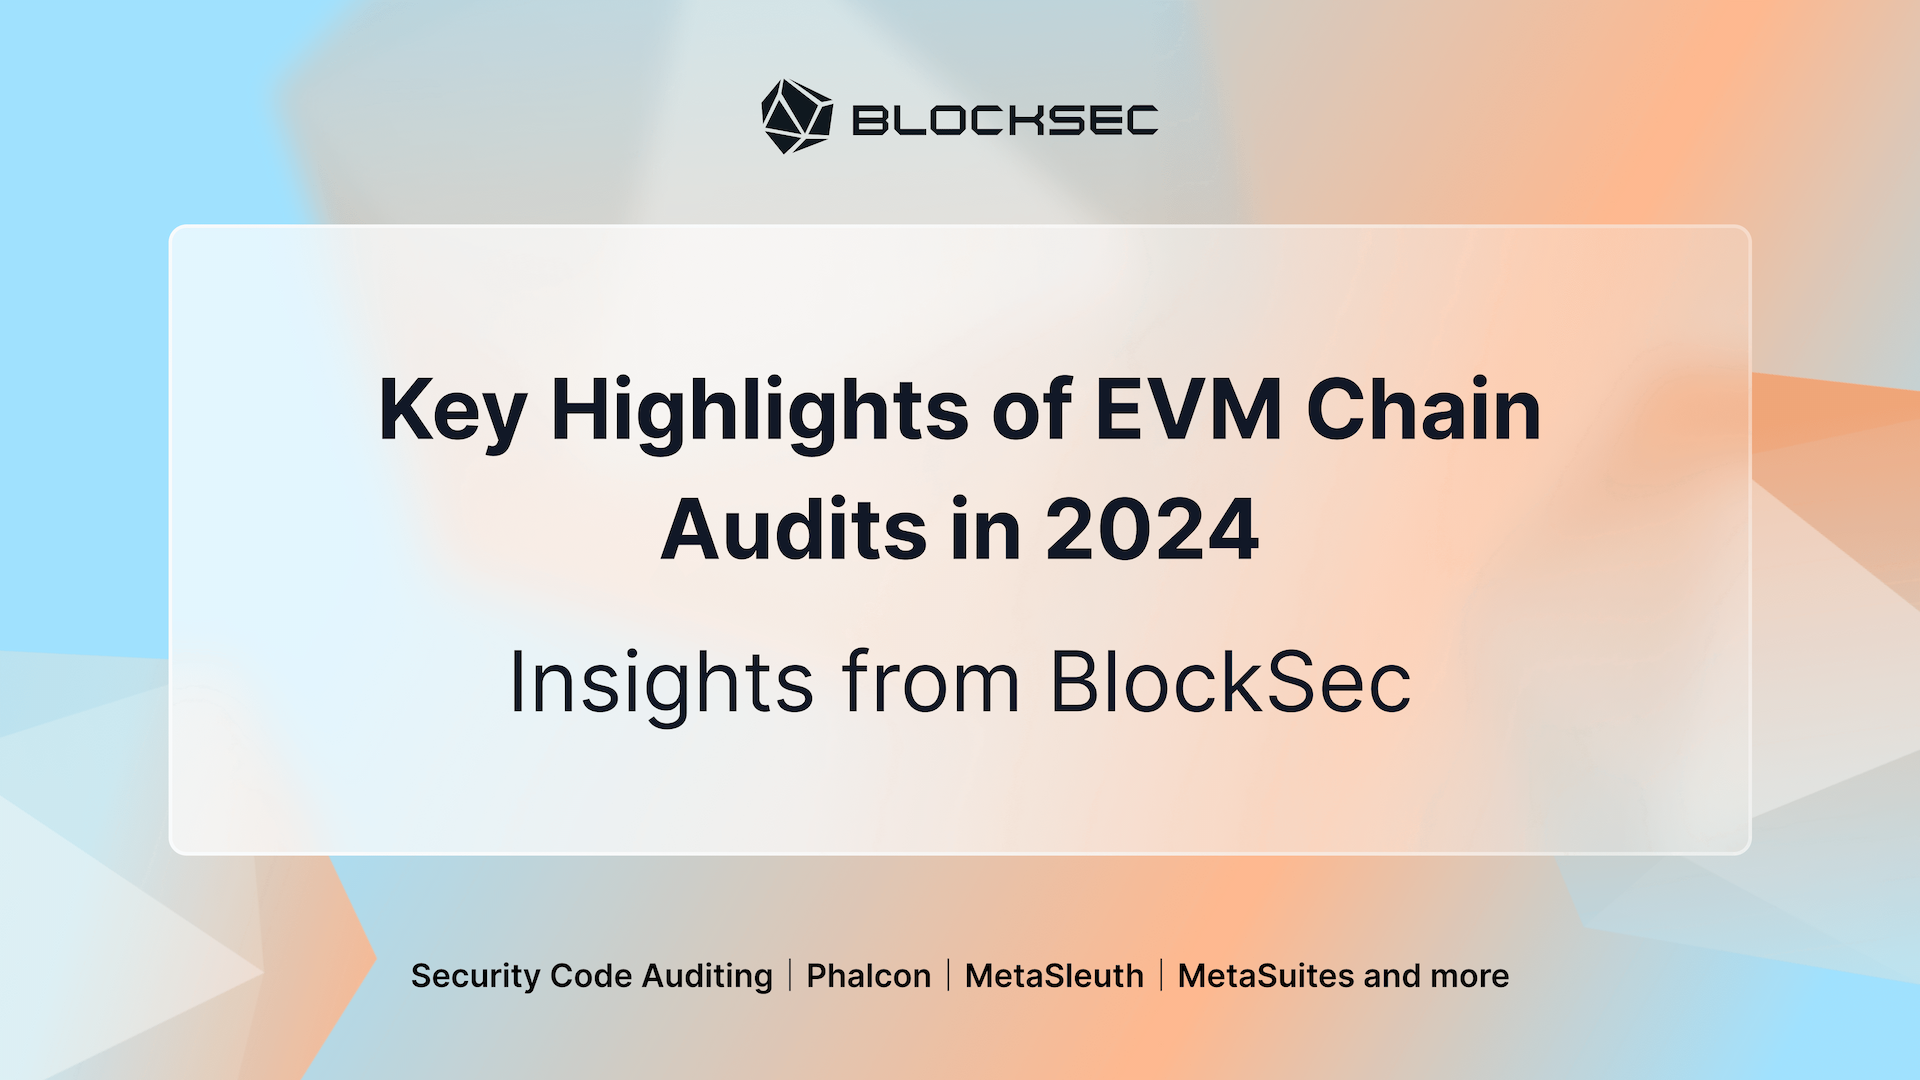 Key Highlights of EVM Chain Audits in 2024 - Insights from BlockSec